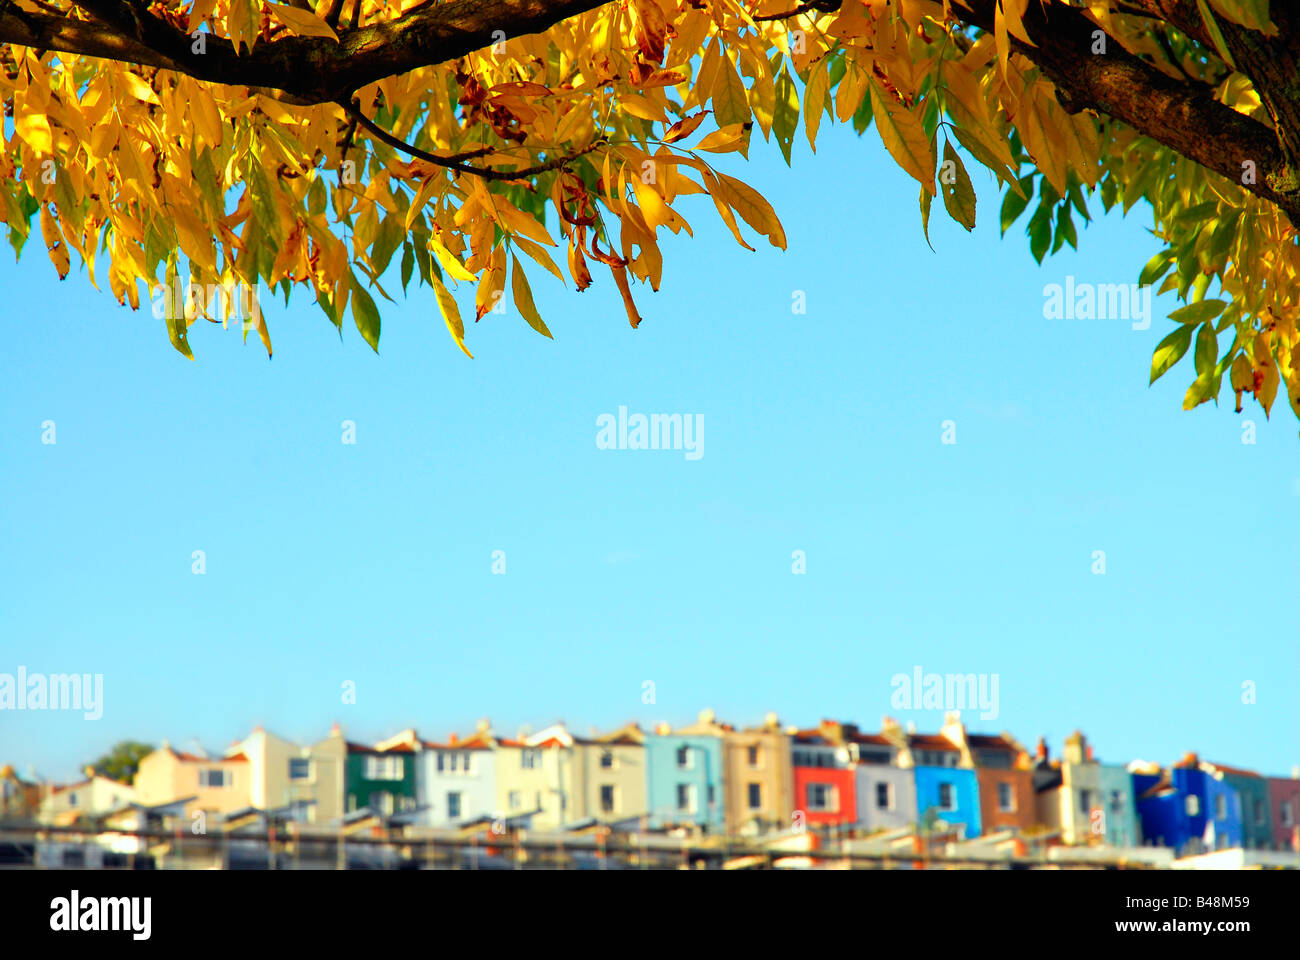 Colourful Autumn leaves on a tree over hanging a defocused row of terraced housing Stock Photo